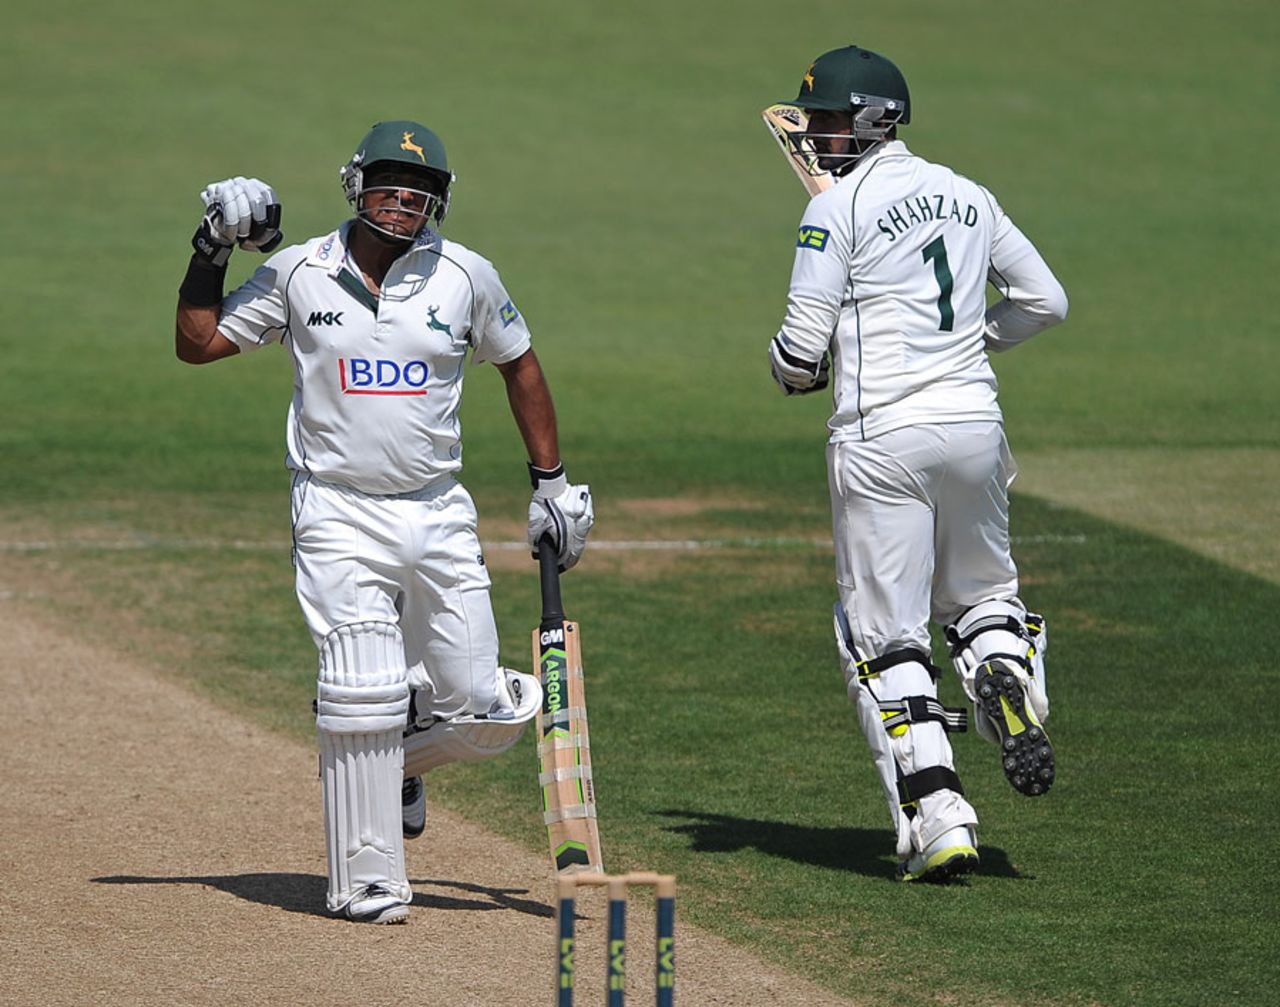 Samit Patel punches the air on reaching his hundred, Surrey v Nottinghamshire, County Championship, Division One, The Oval, 3rd day, July 10, 2013